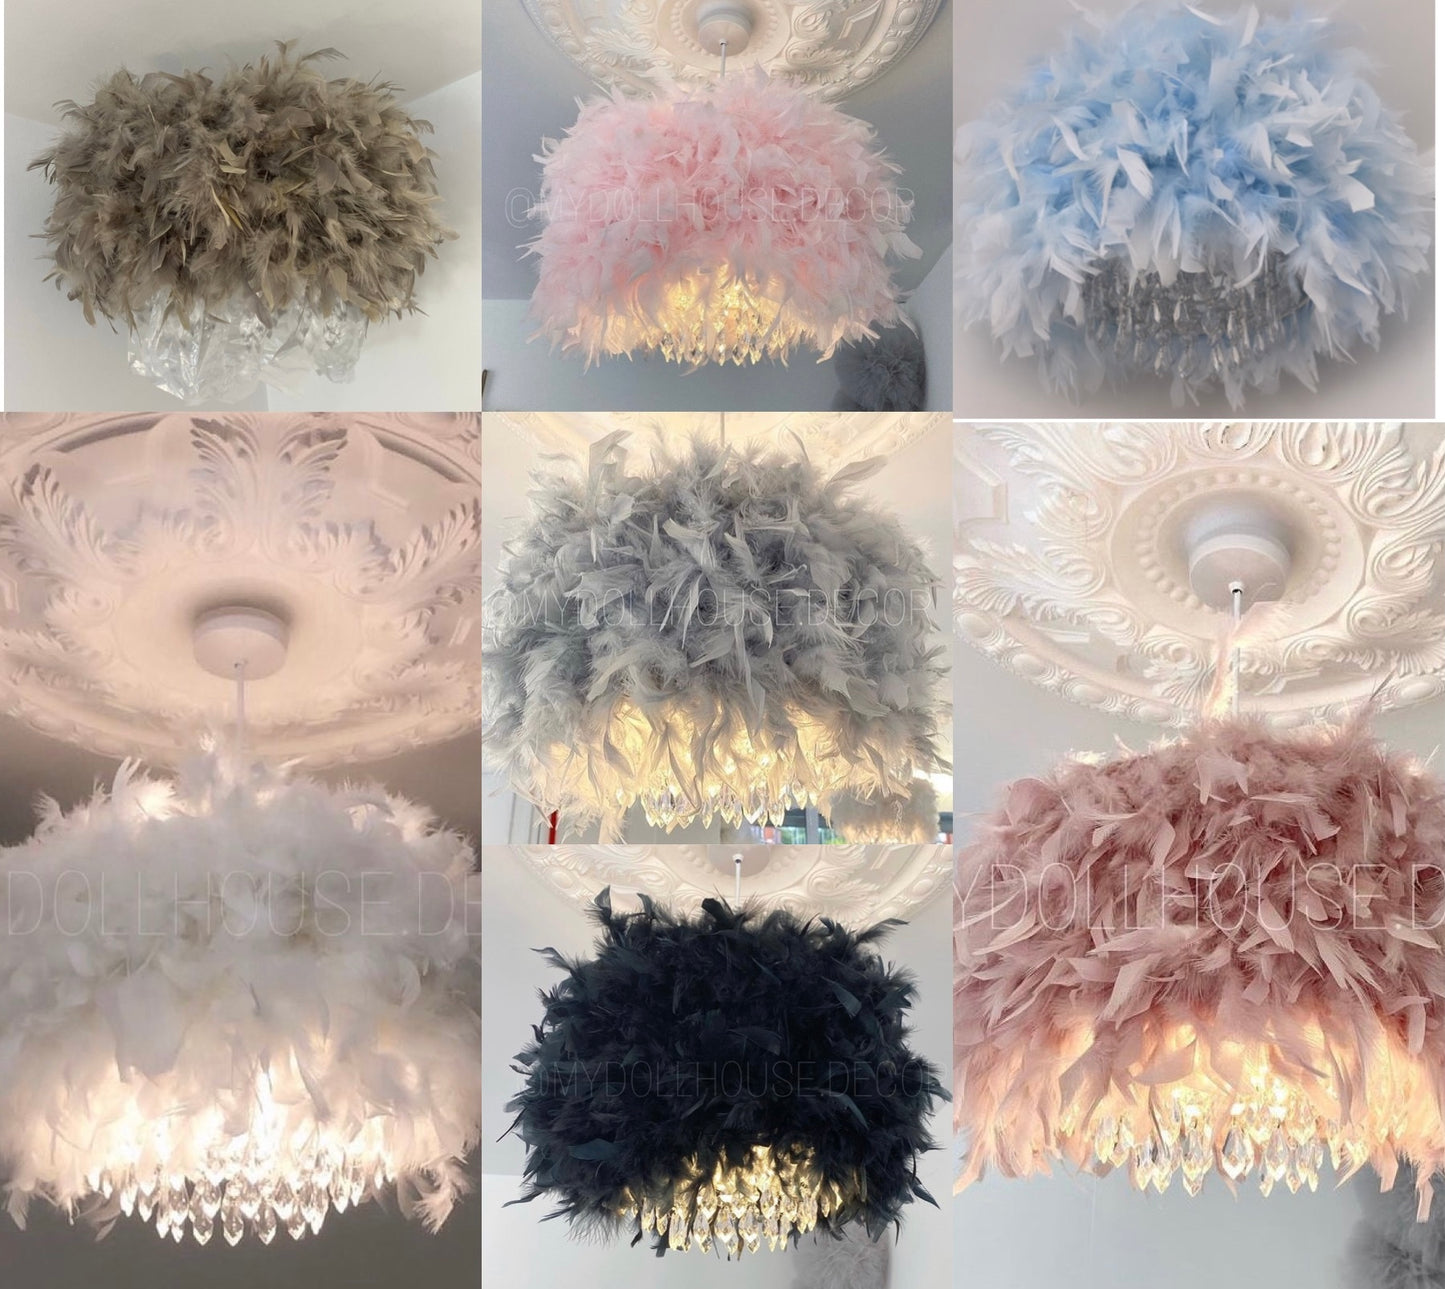 LARGE FEATHER CHANDELIER 2-4 WEEKS